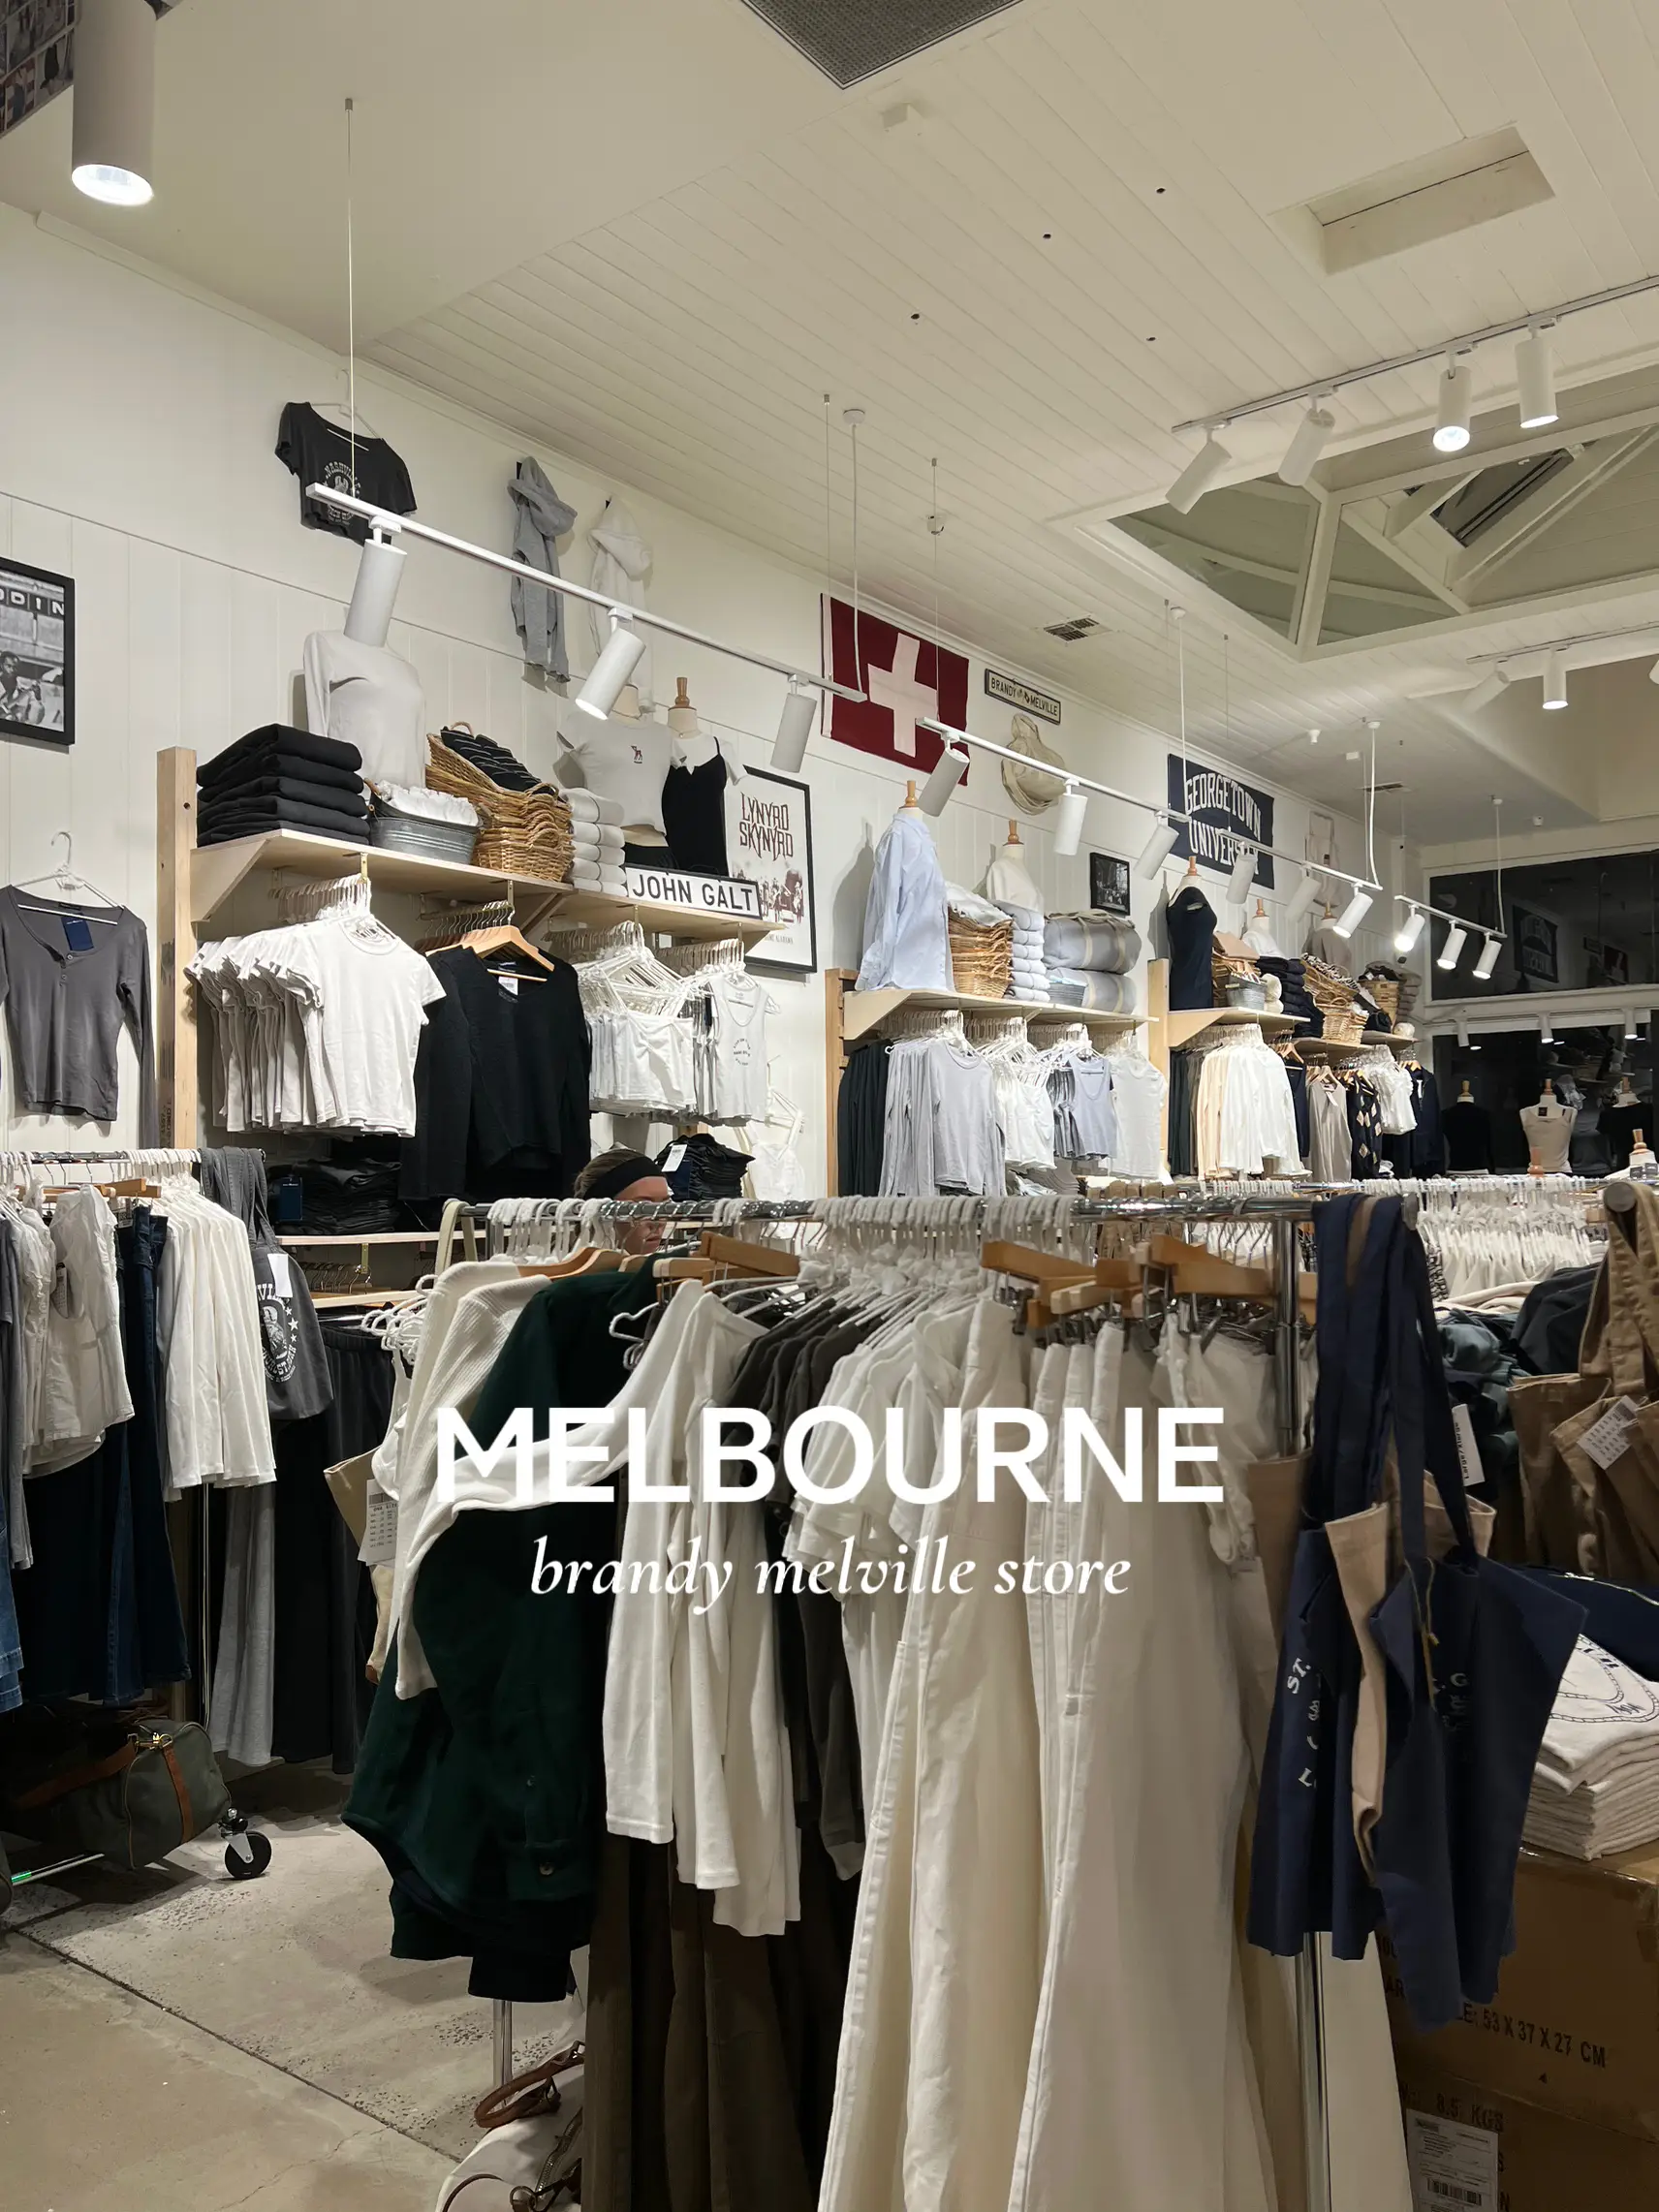 Visiting Melbourne's only Brandy Melville!